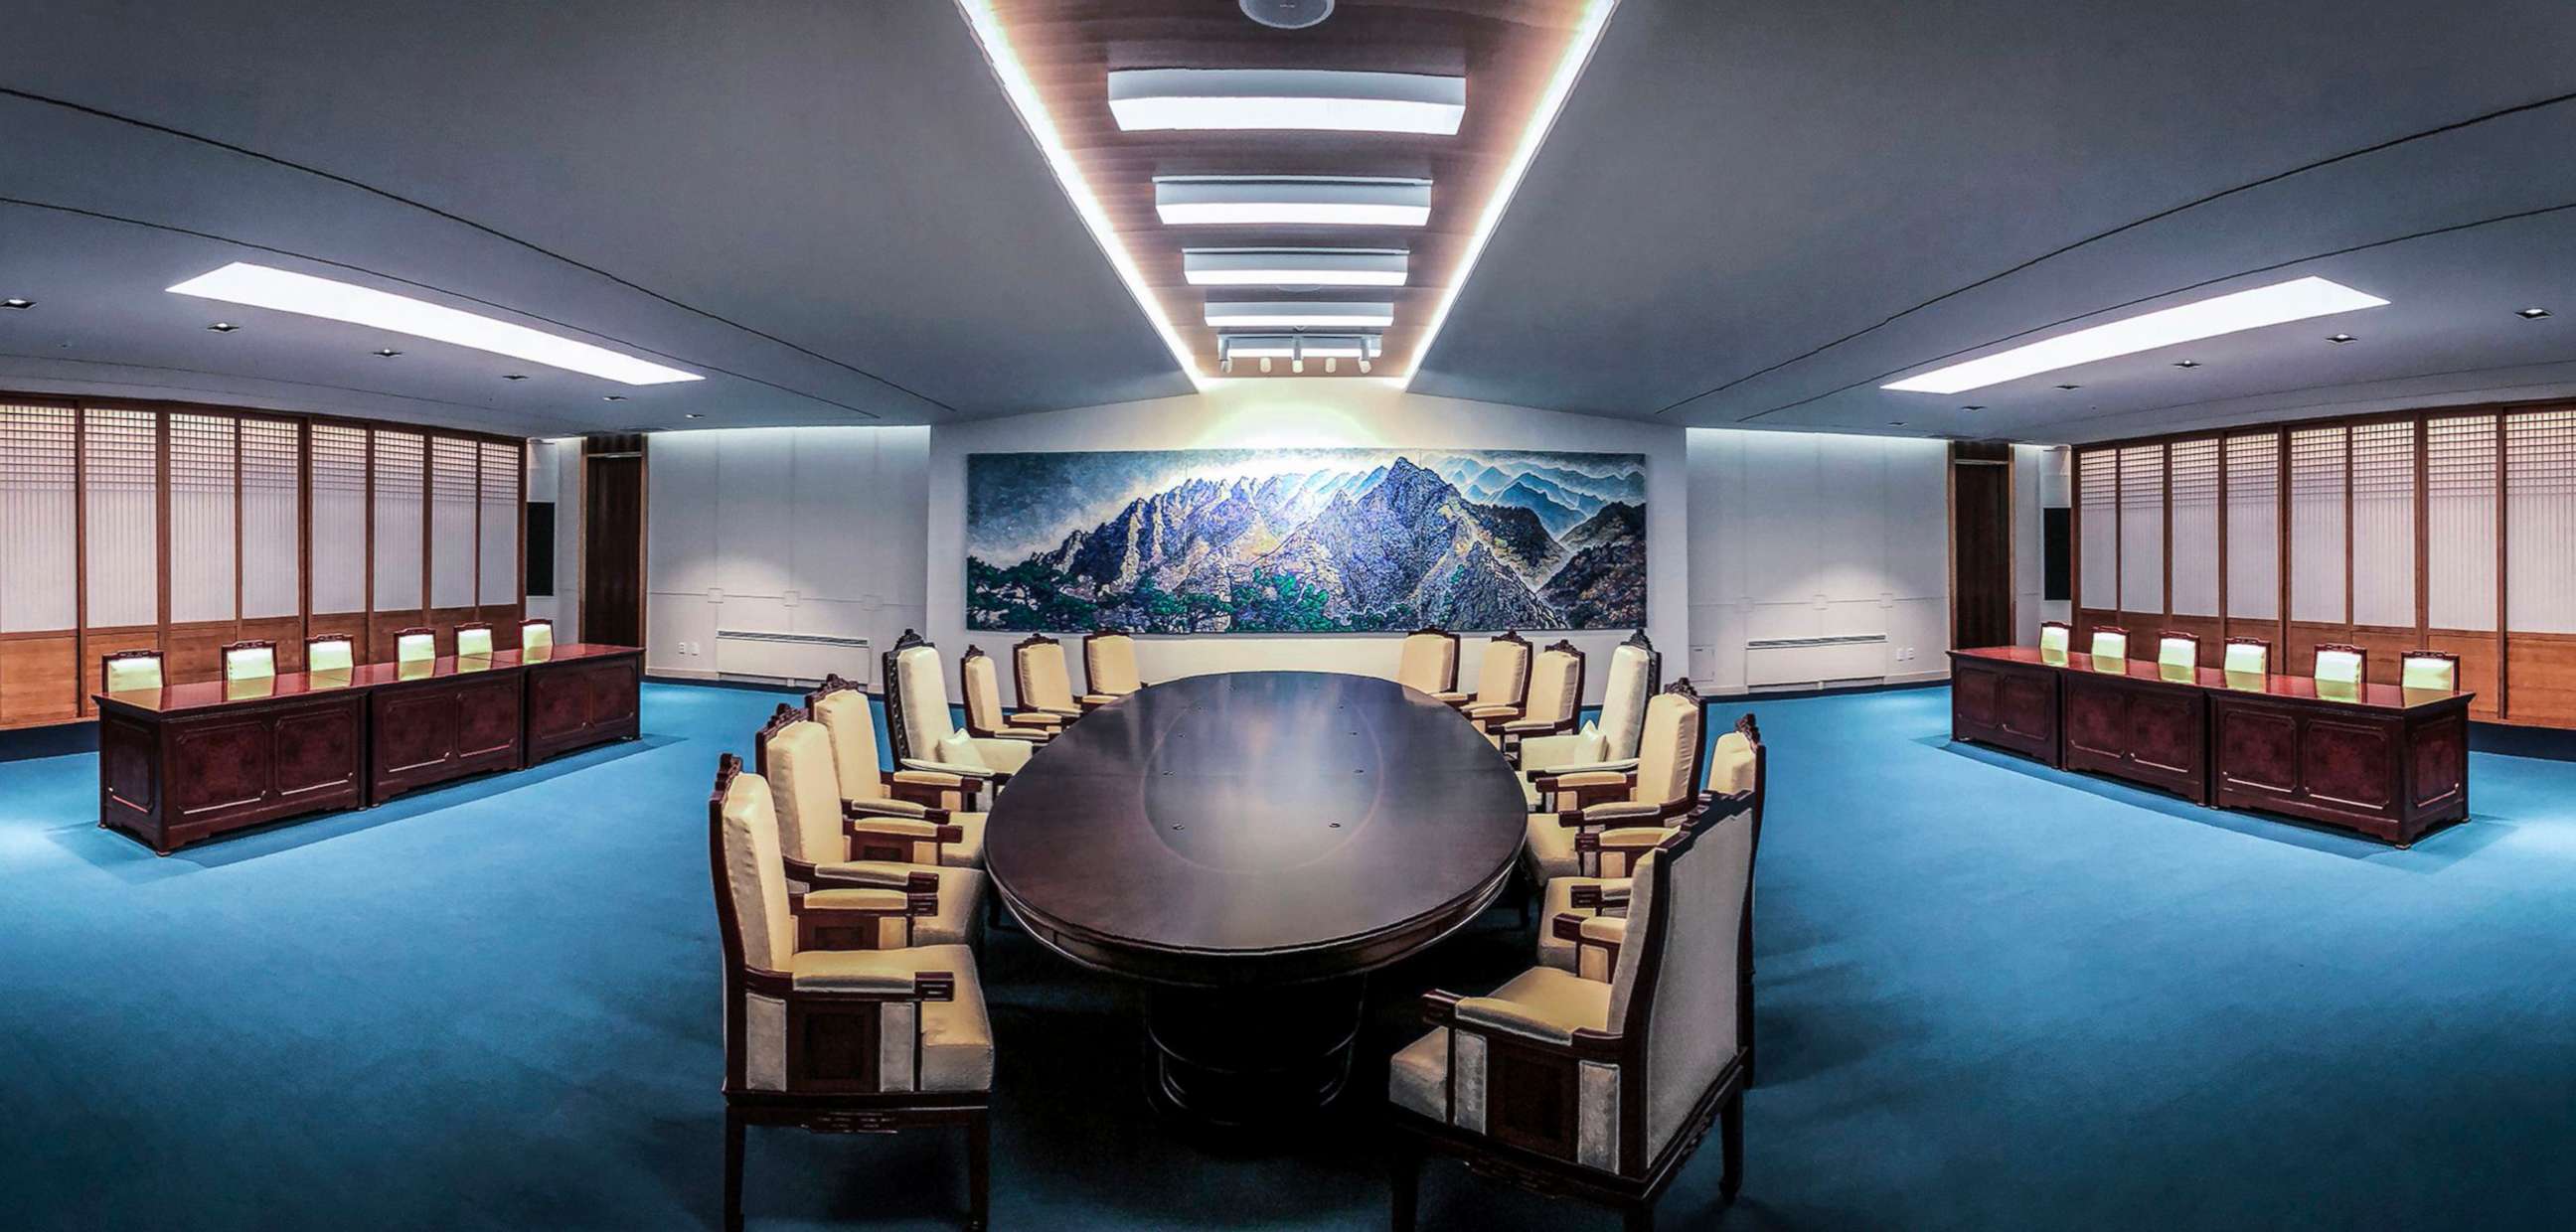 PHOTO: The meeting room for the upcoming inter-Korean summit at the border truce village of Panmunjom in the Demilitarized zone dividing the two Koreas, released April 25, 2018.